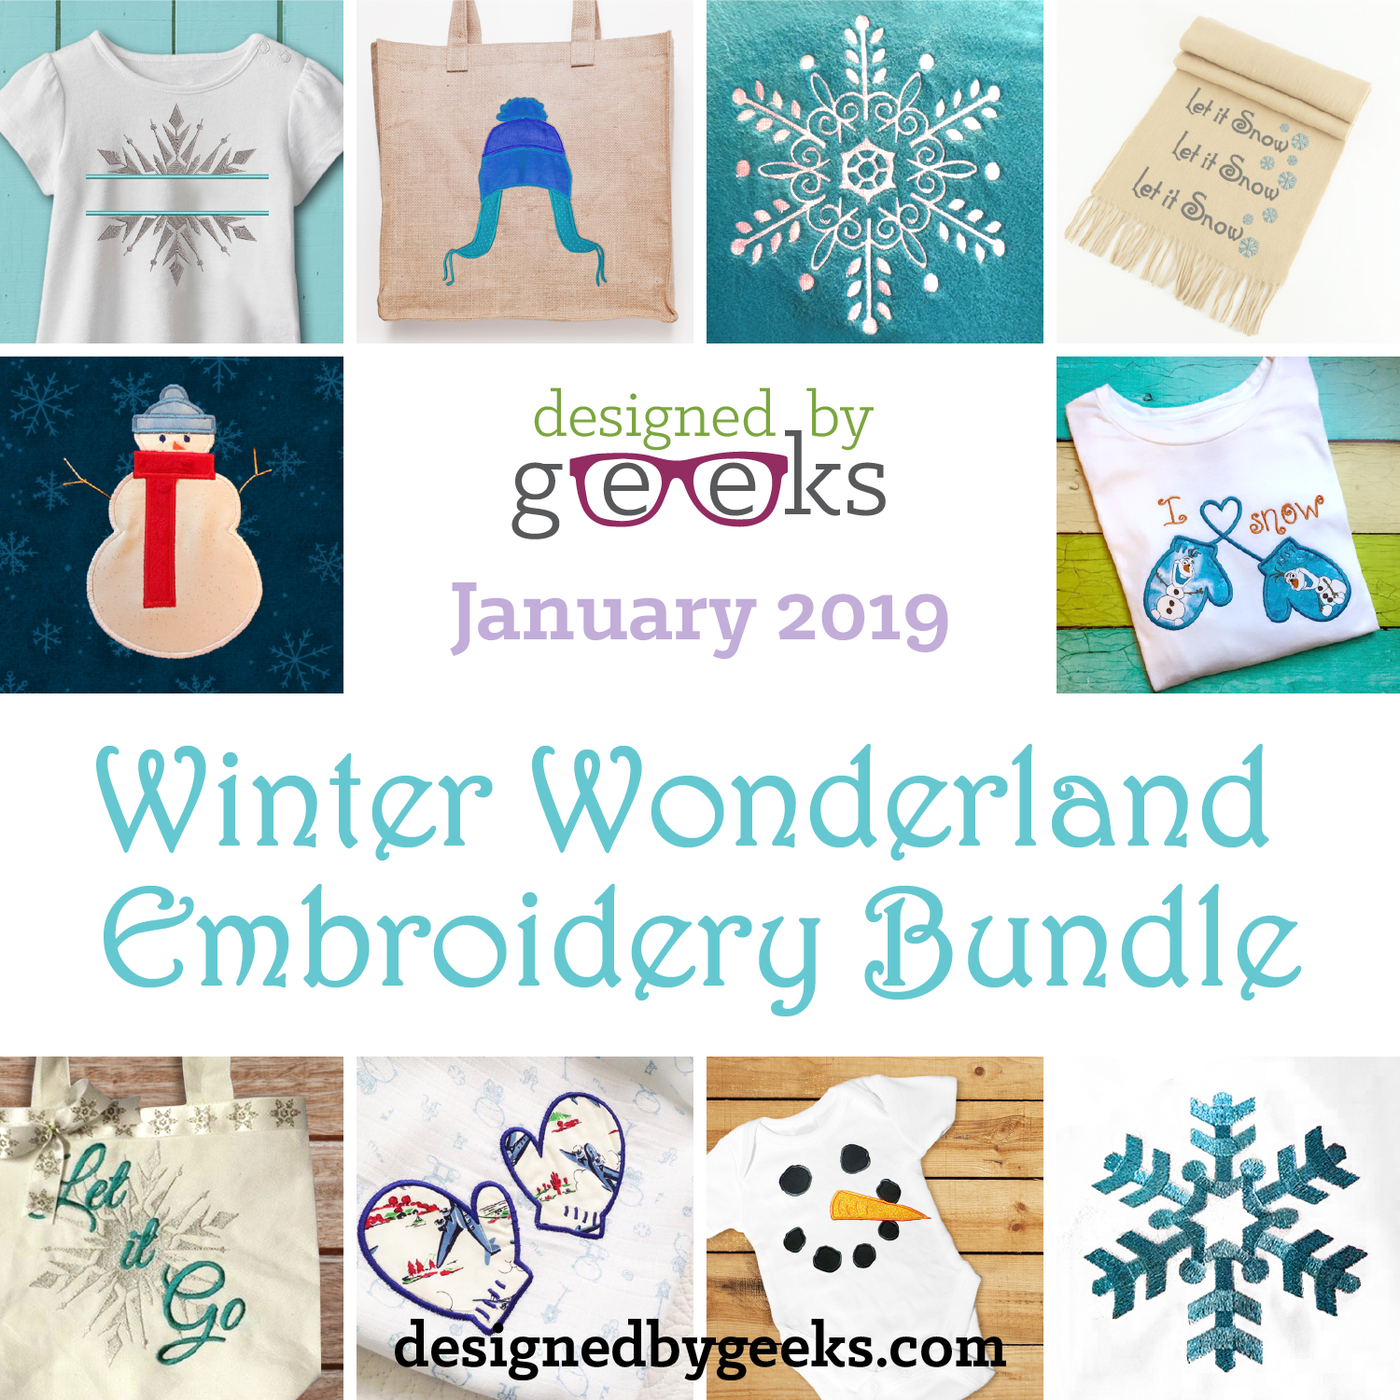 A grid of 10 designs. In the middle it says "Designed by Geeks January 2019 Winter Wonderland Embroidery Bundle. The 10 designs featured in the grid are all applique and embroidery with a winter and snow theme.